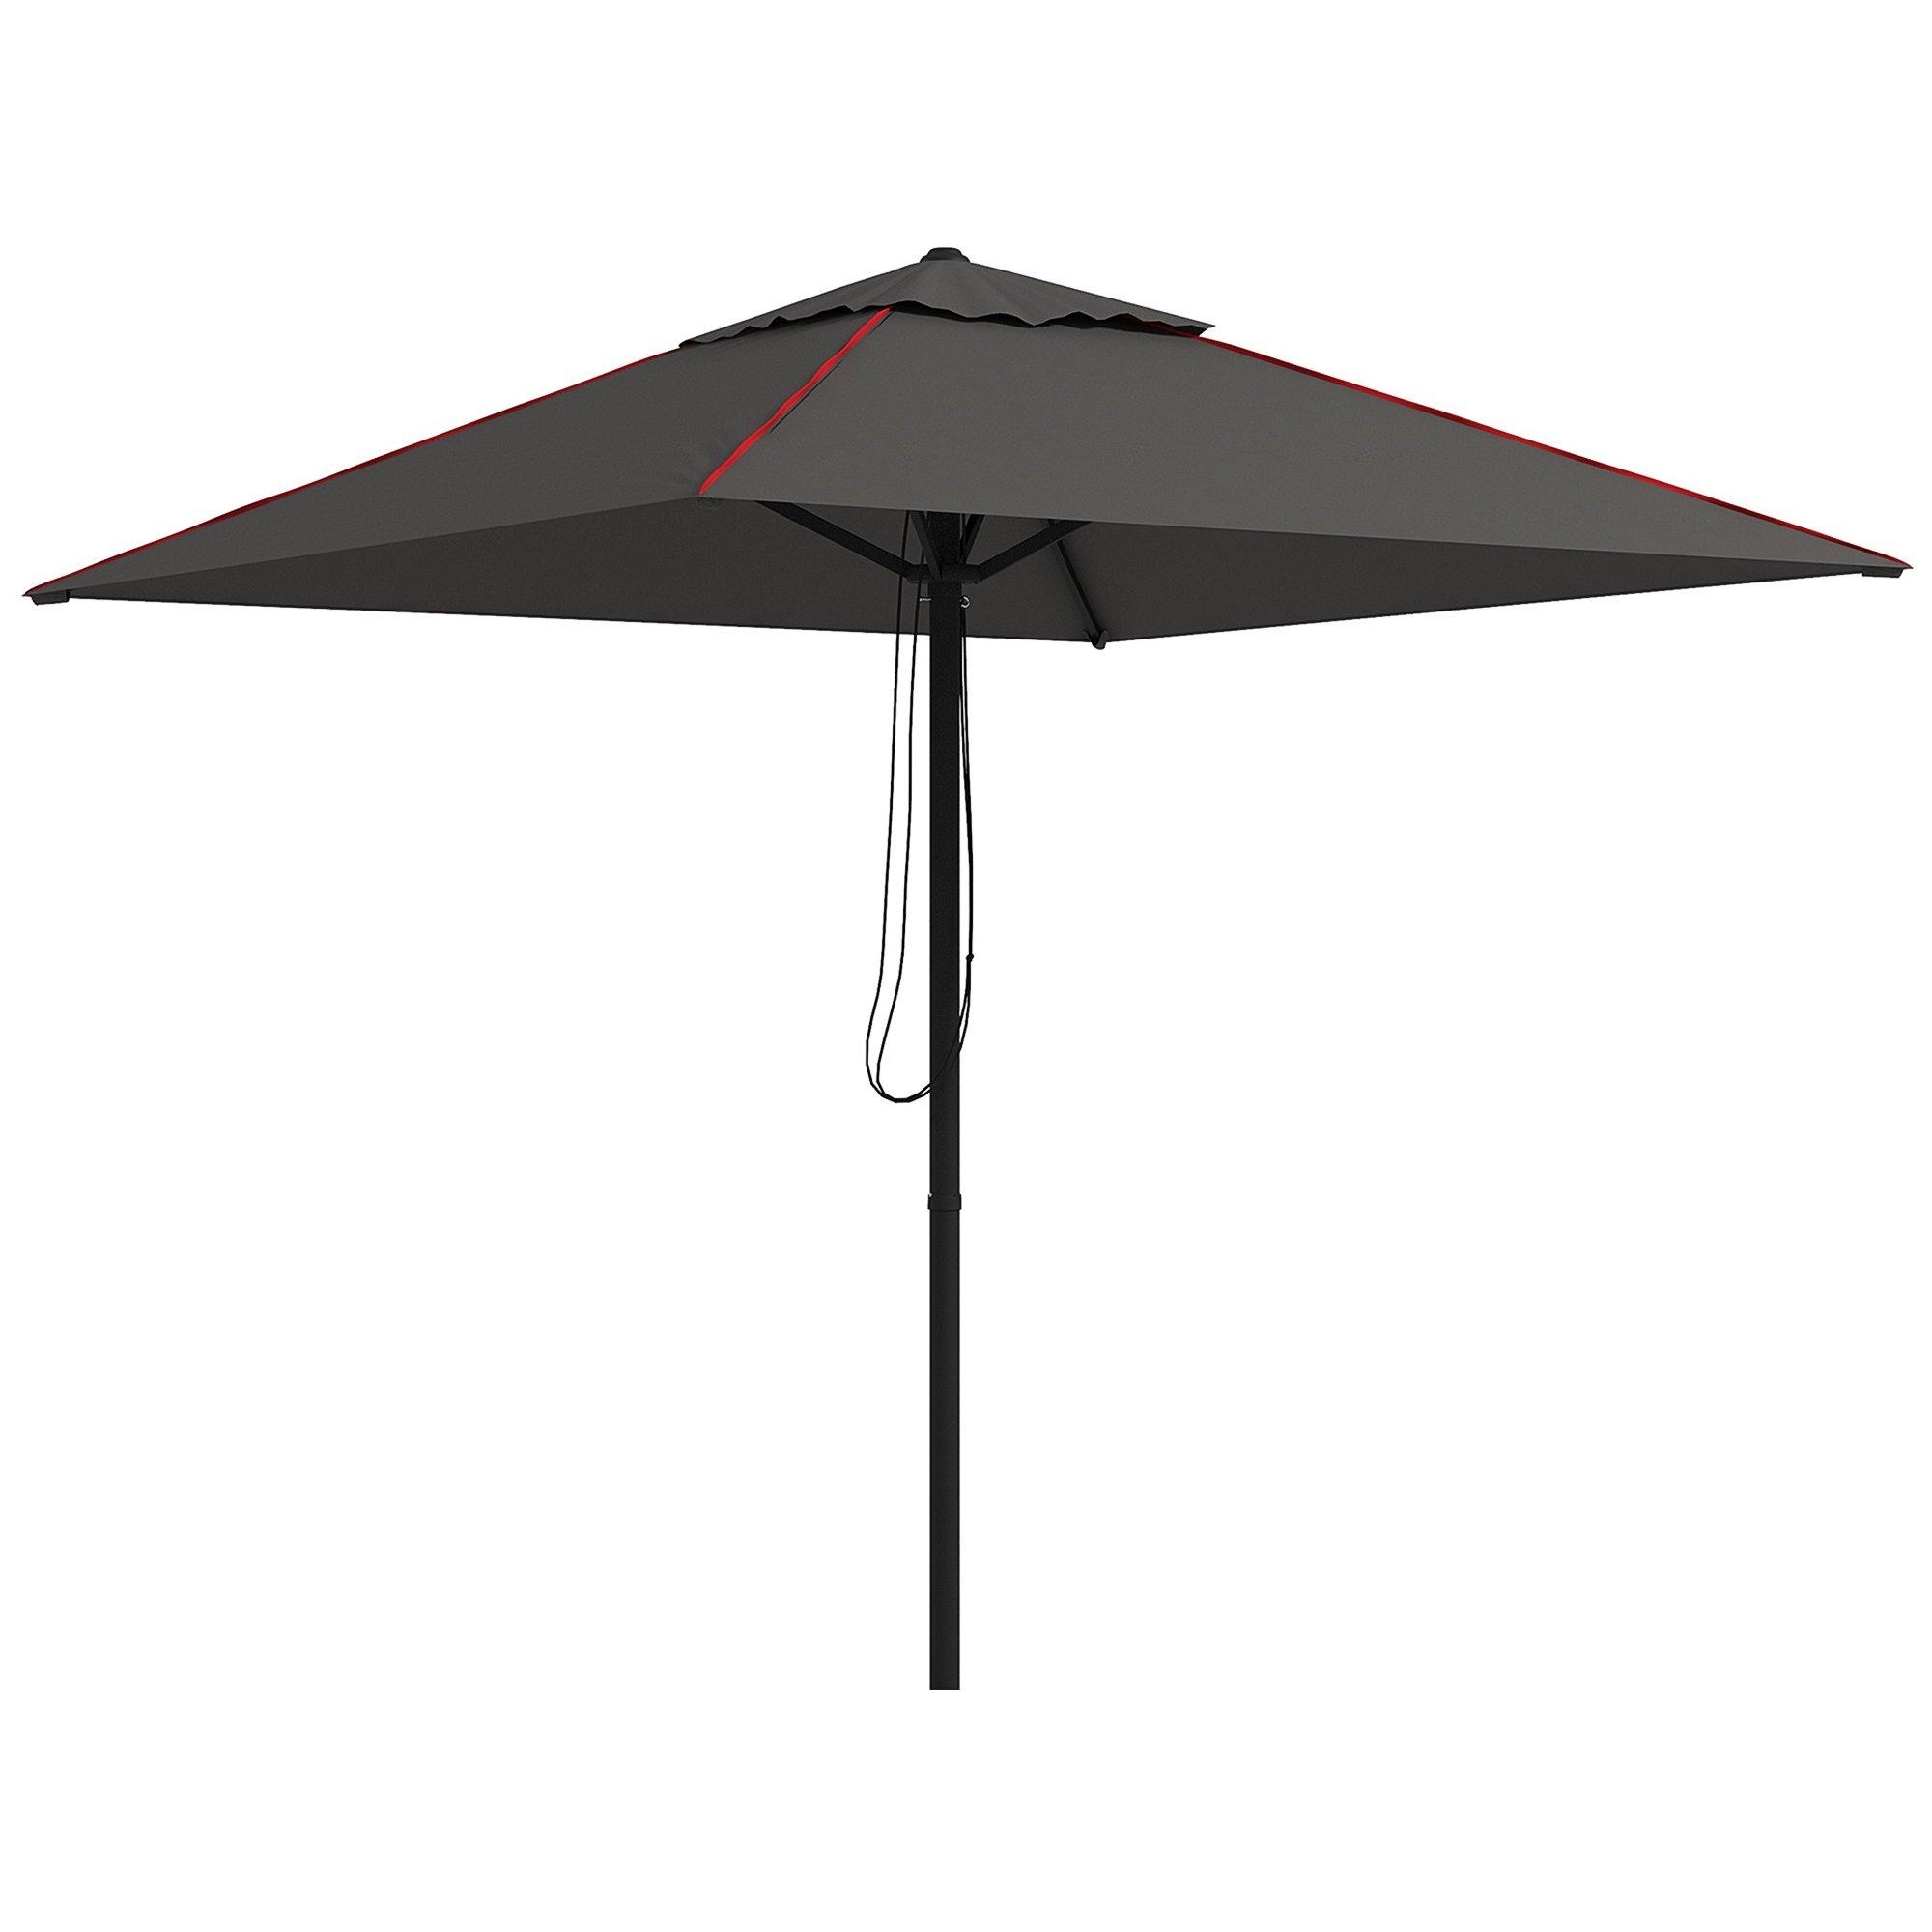 Outdoor Parasol Umbrella with Vent, Piping Side, for Garden Table